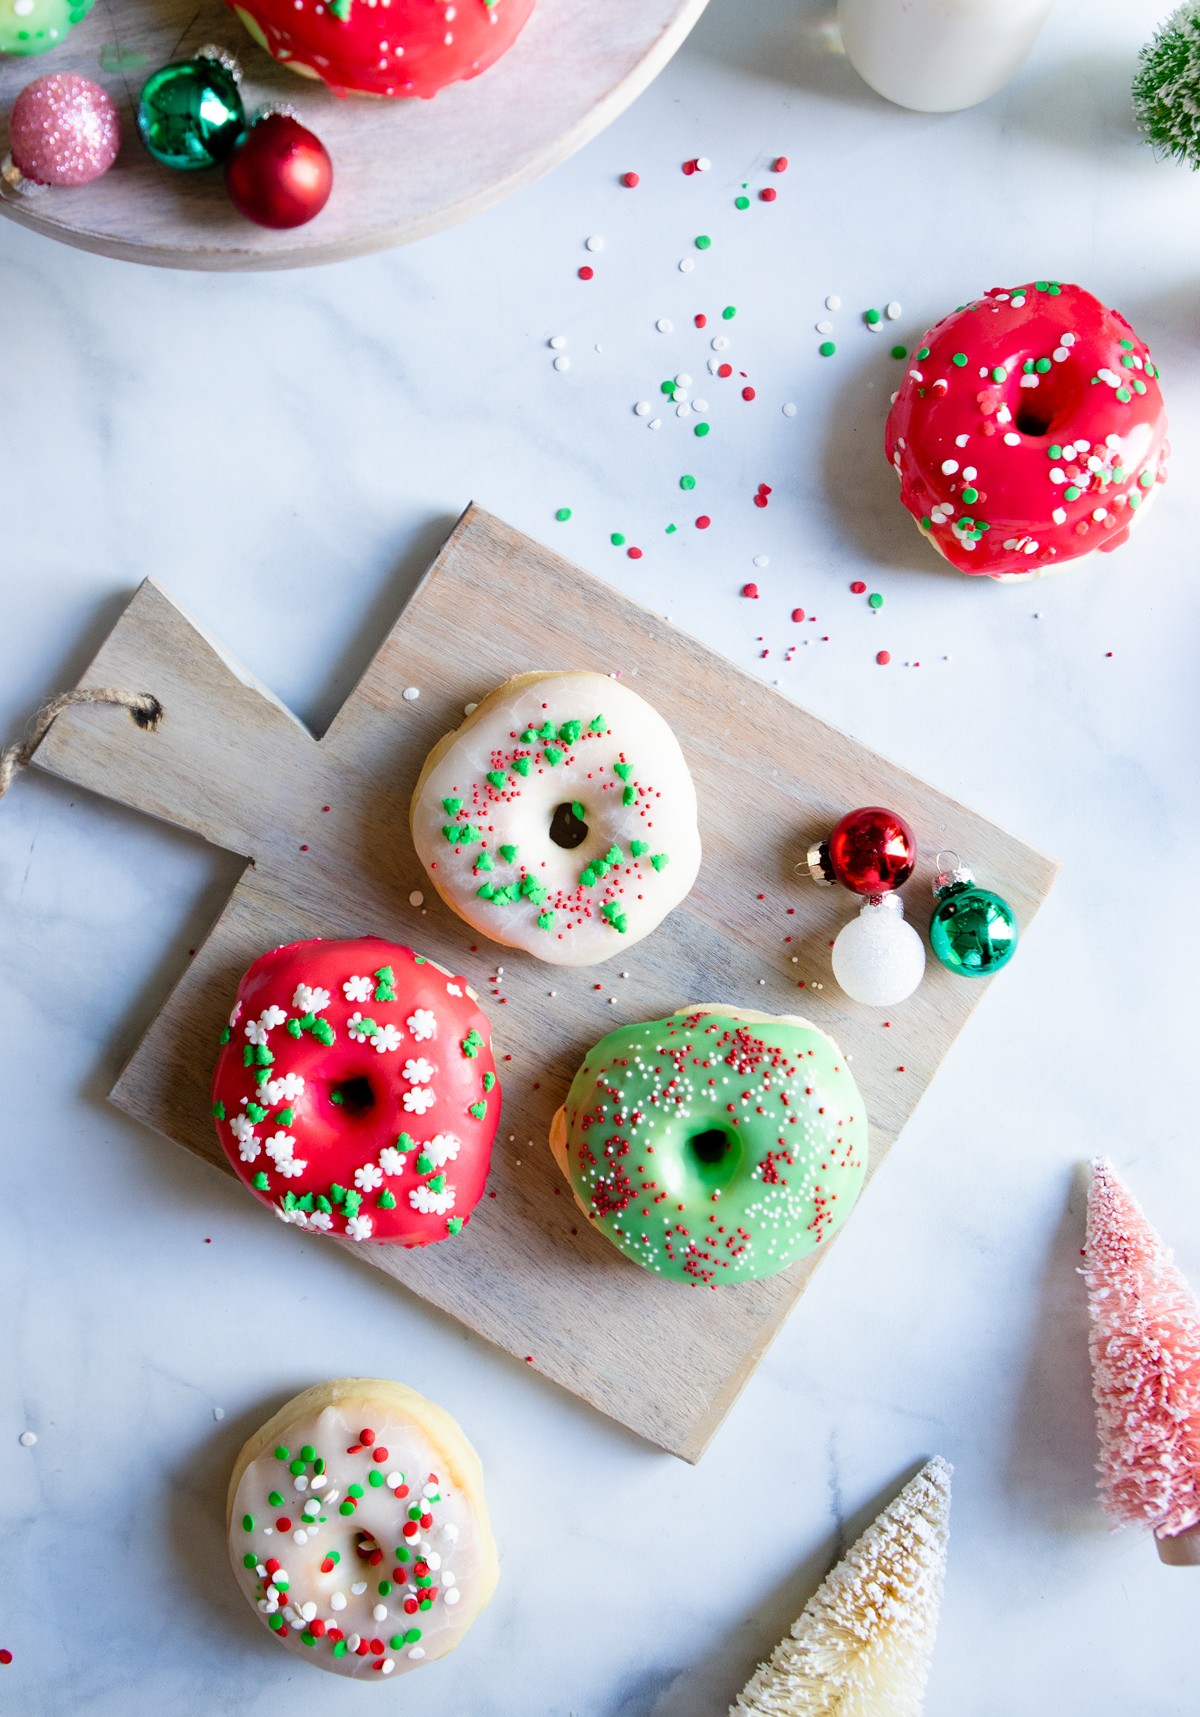 donuts glazed with red and green frosting and topped with holiday sprinkles 